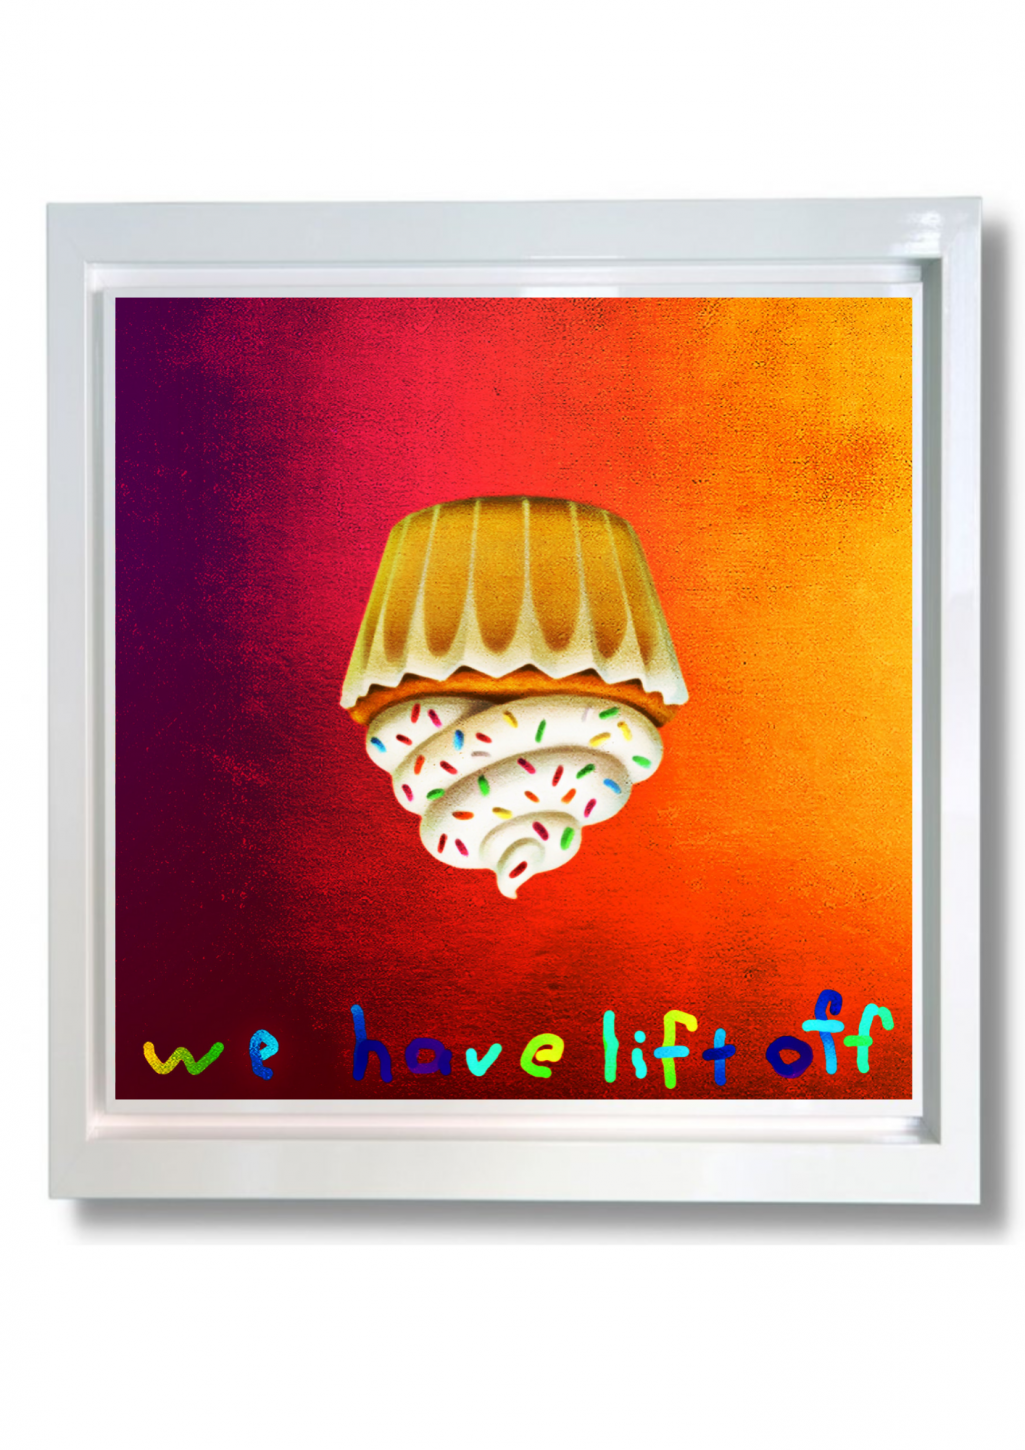 Alex Echo - 'We Have Lift Off' -  Framed Limited Edition